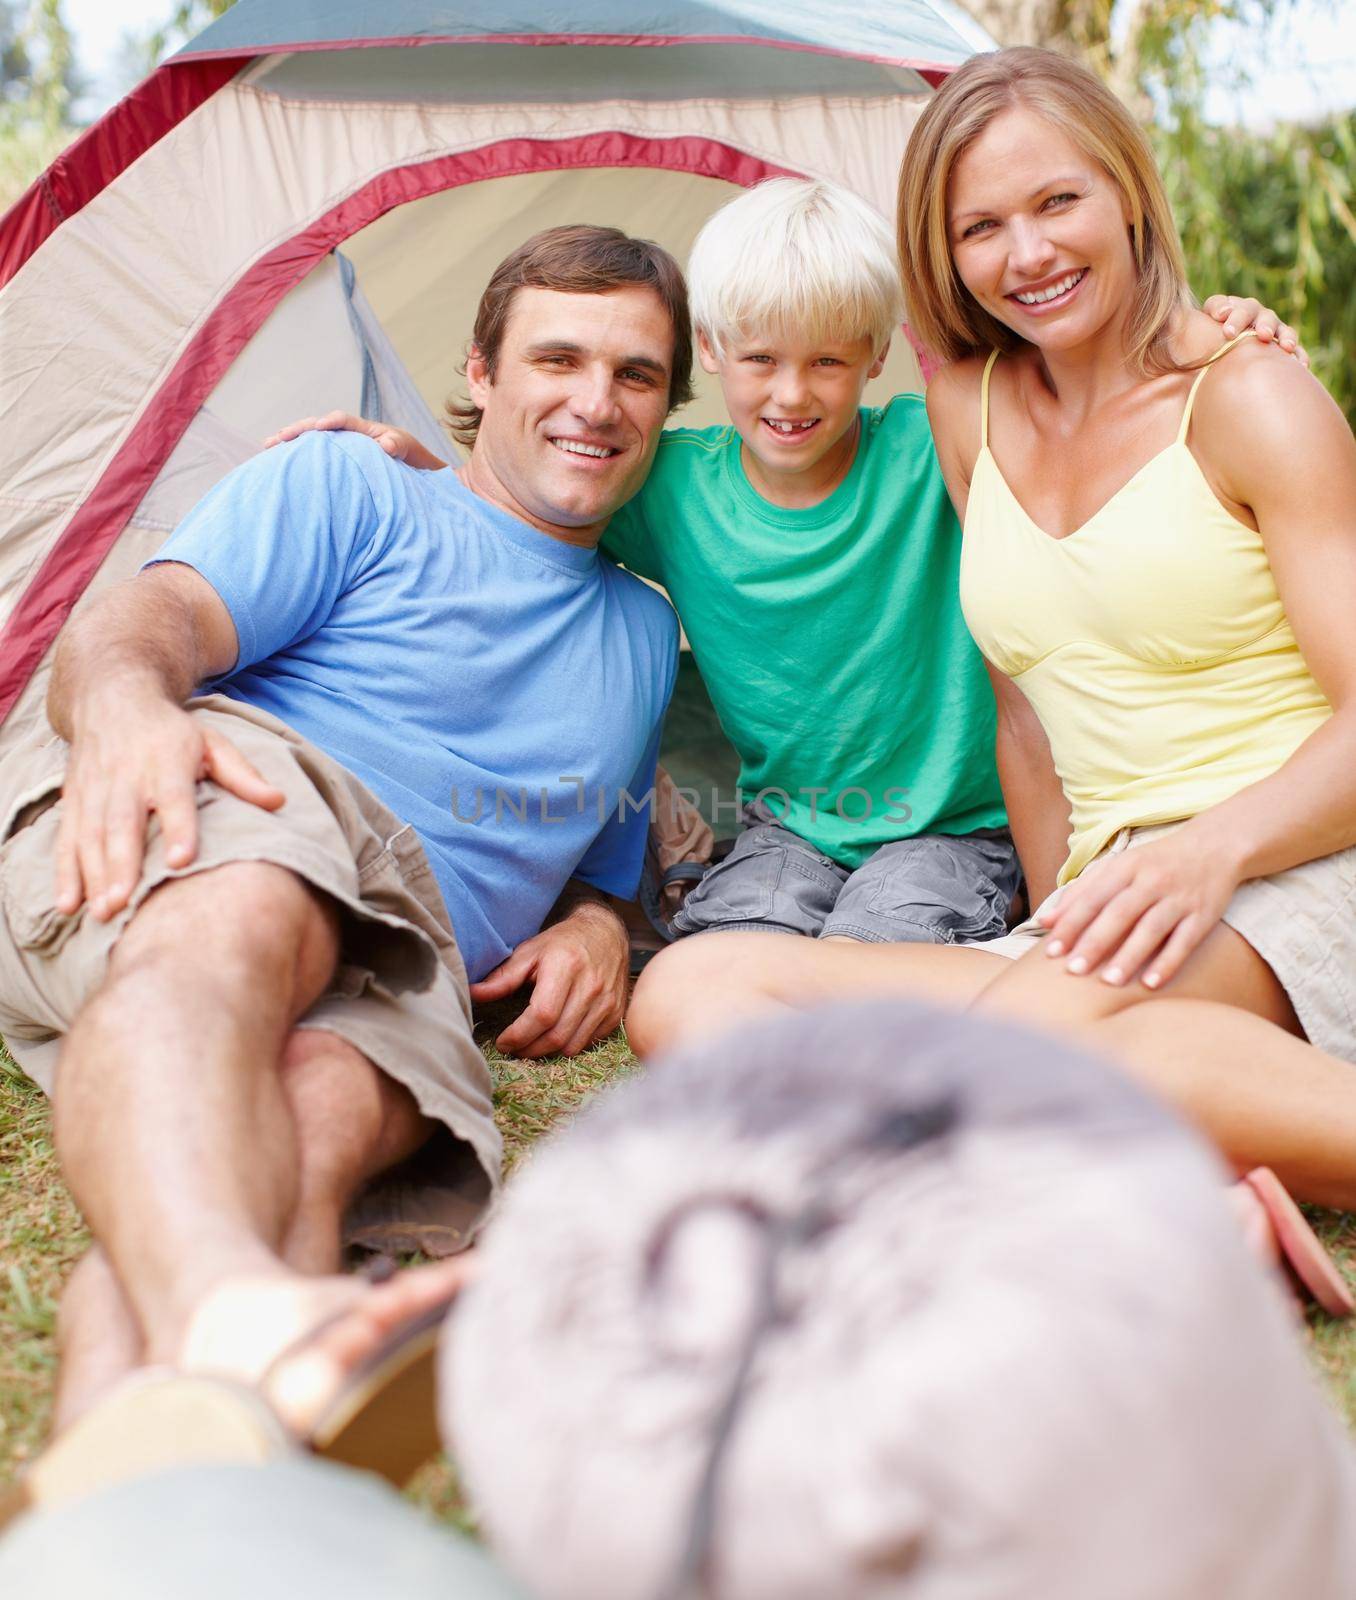 Attractive family camping. Portrait of an attractive family of three sitting in front of tent and smiling